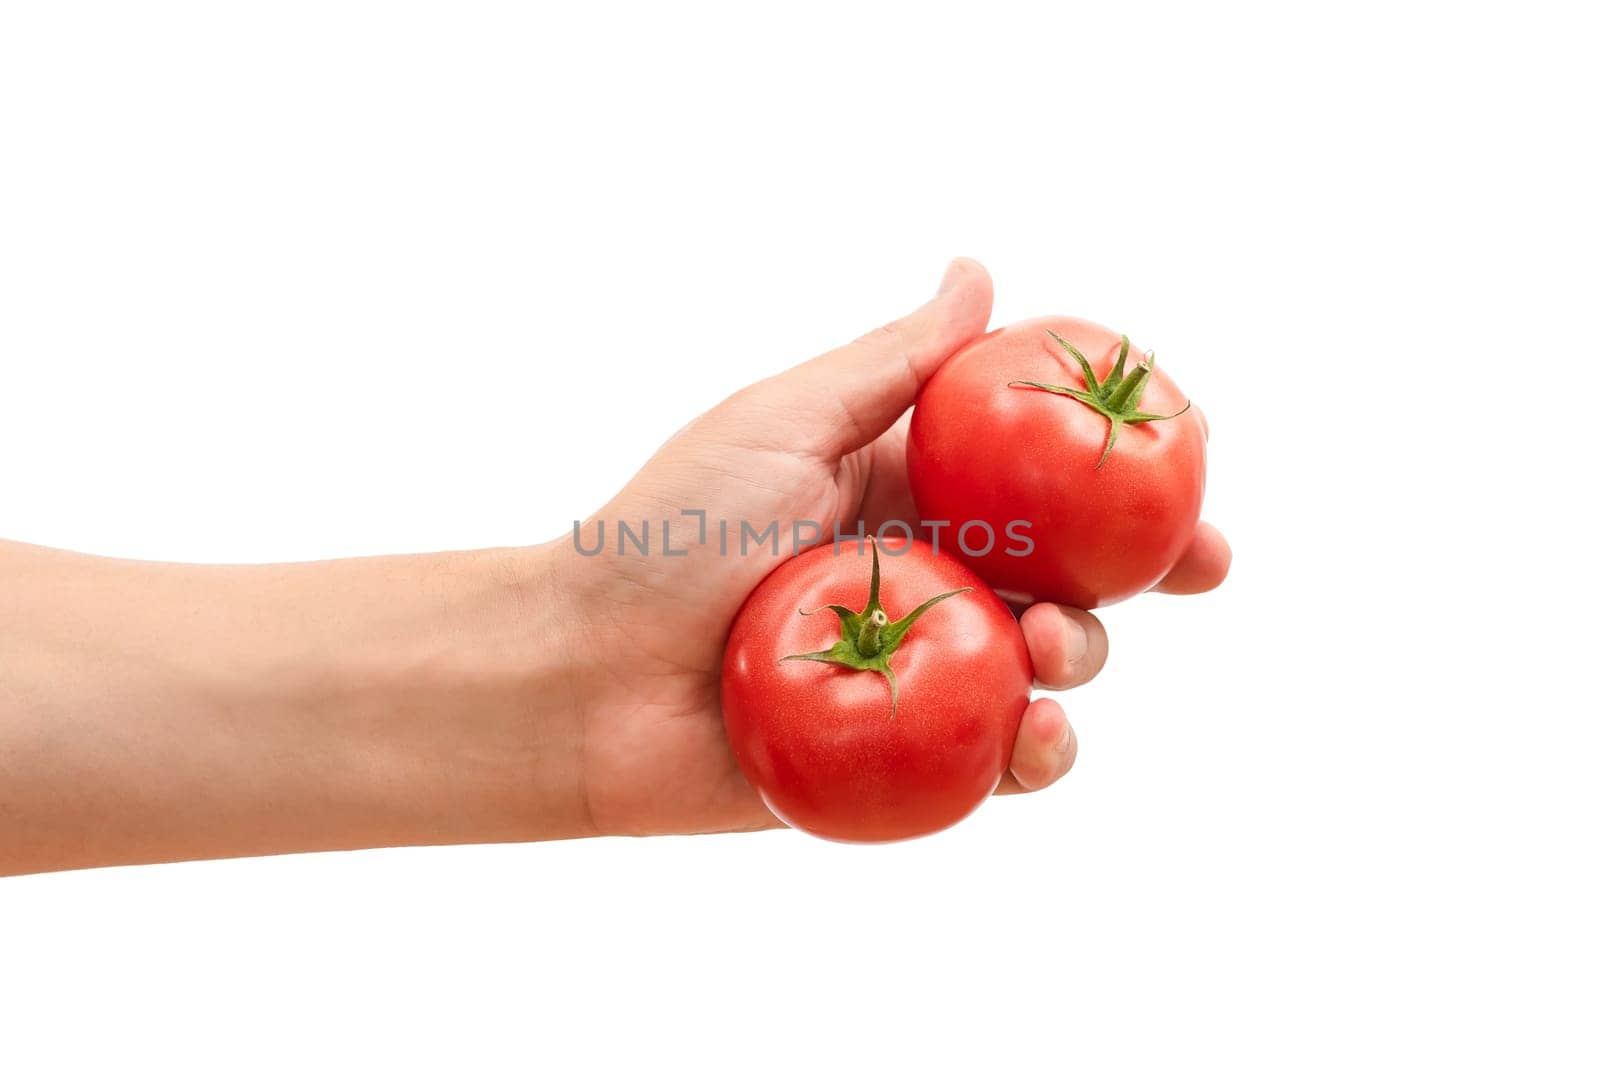 Mans hand holding red tomatoes in hand isolated on white background.